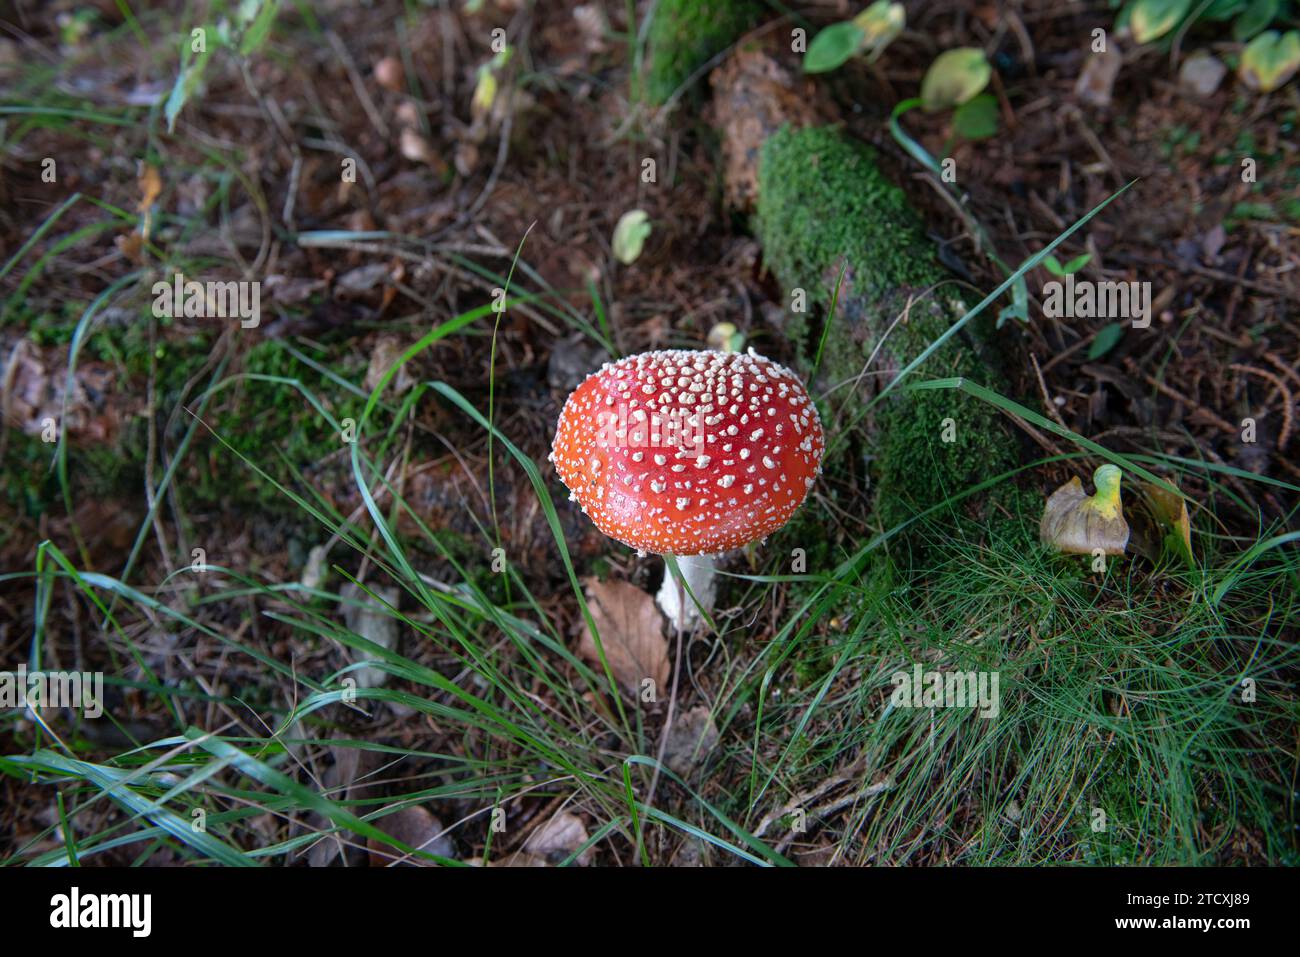 toxic and poisonous mud, the scientific name is amanita muscaria, it has many popular names including that of white snow, life-threatening, poison, Stock Photo